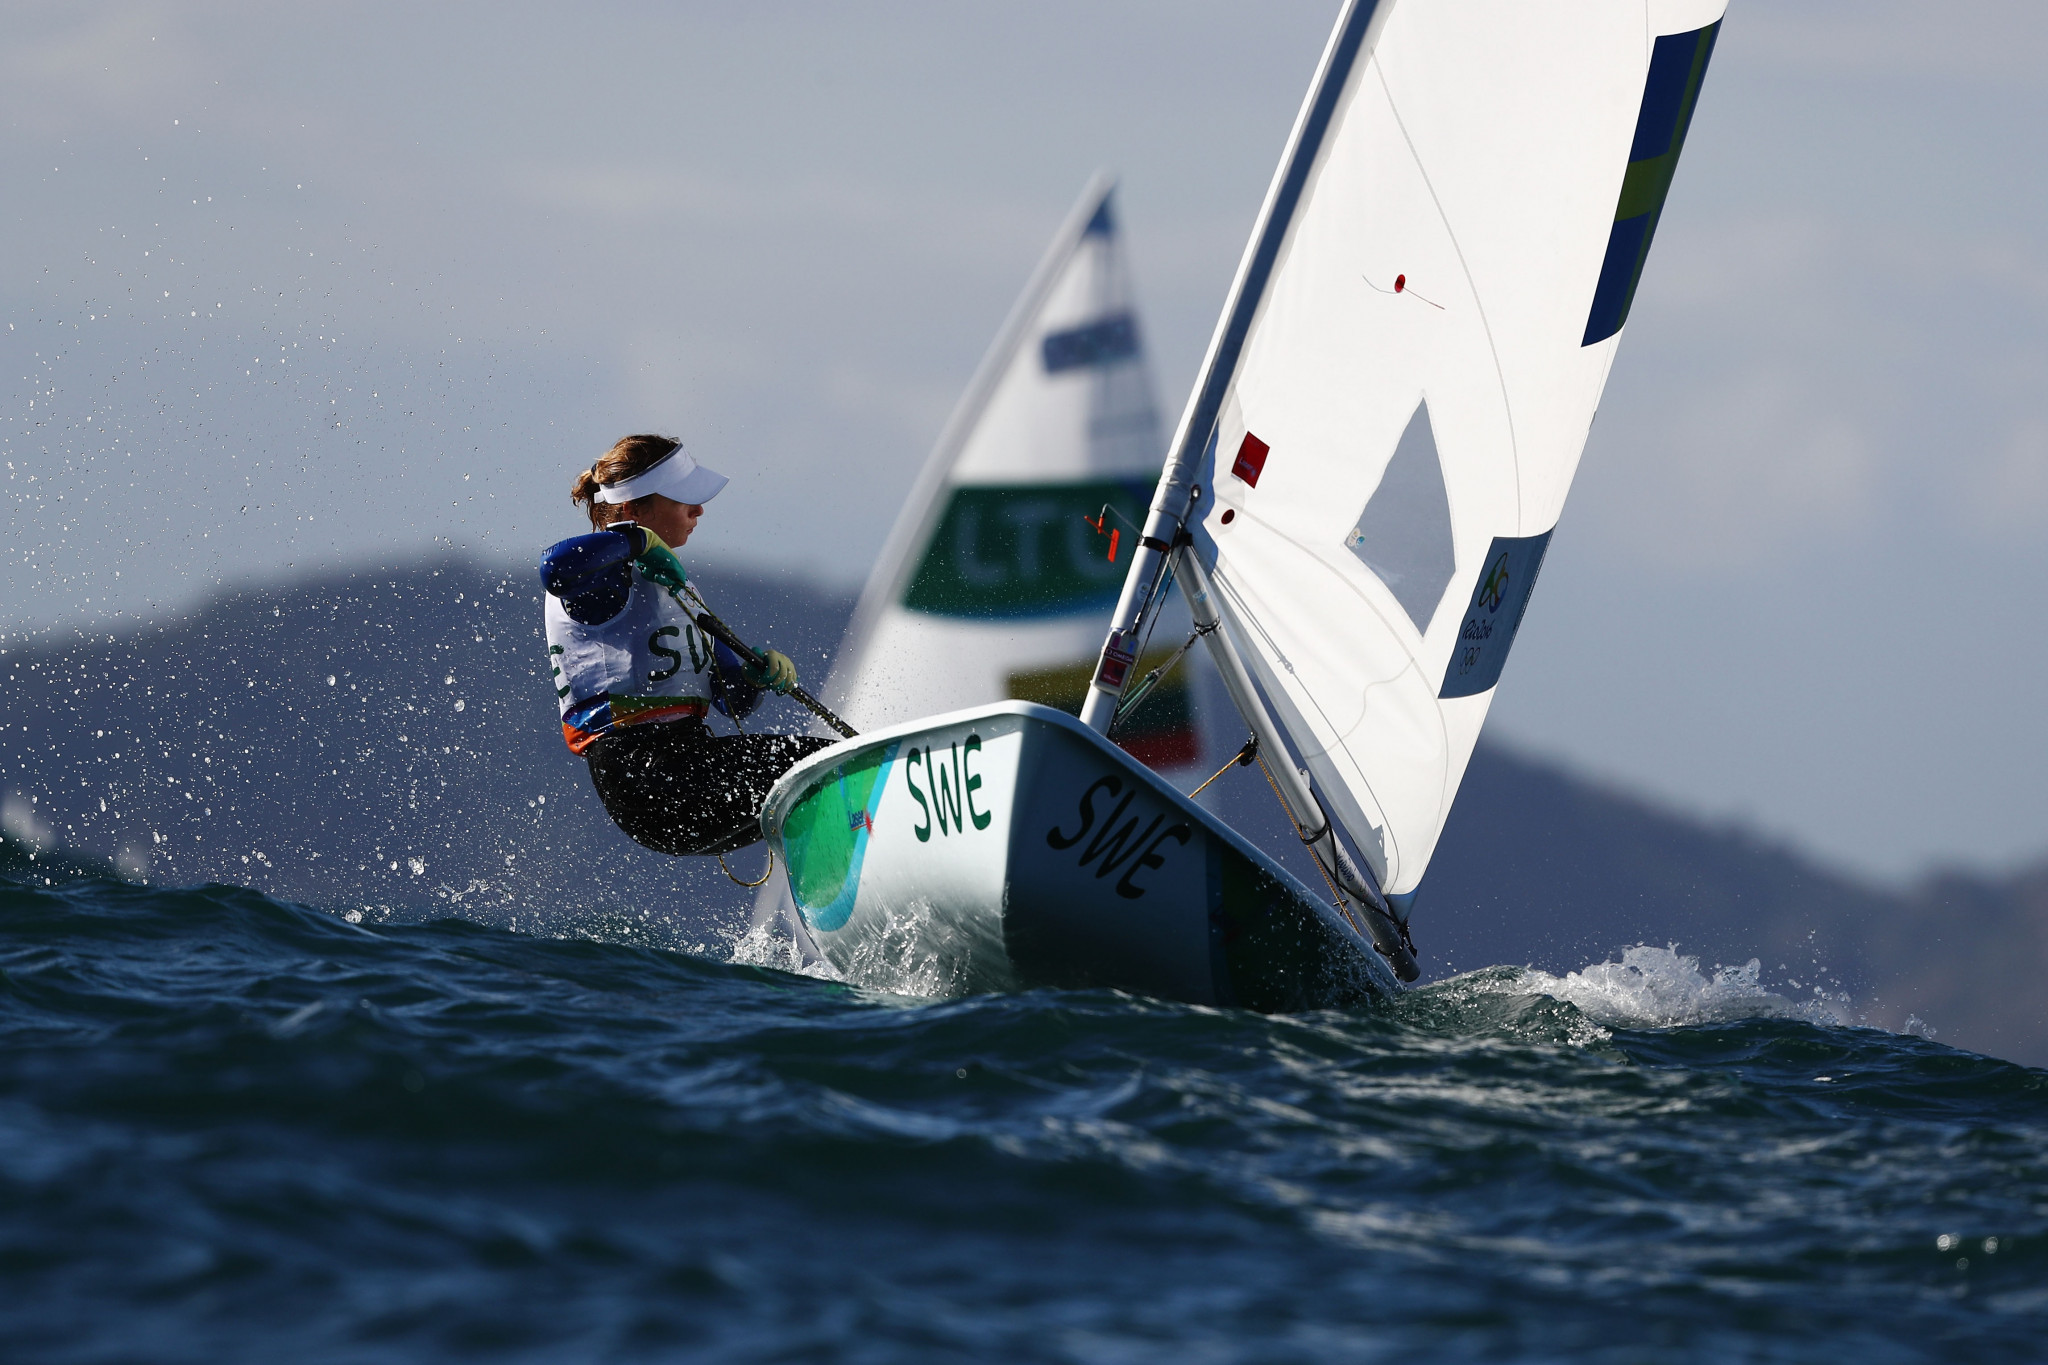 Sweden's Josefin Olsson kept hold of her lead after day three of the Laser Radial Women's World Championship in Japan ©Getty Images